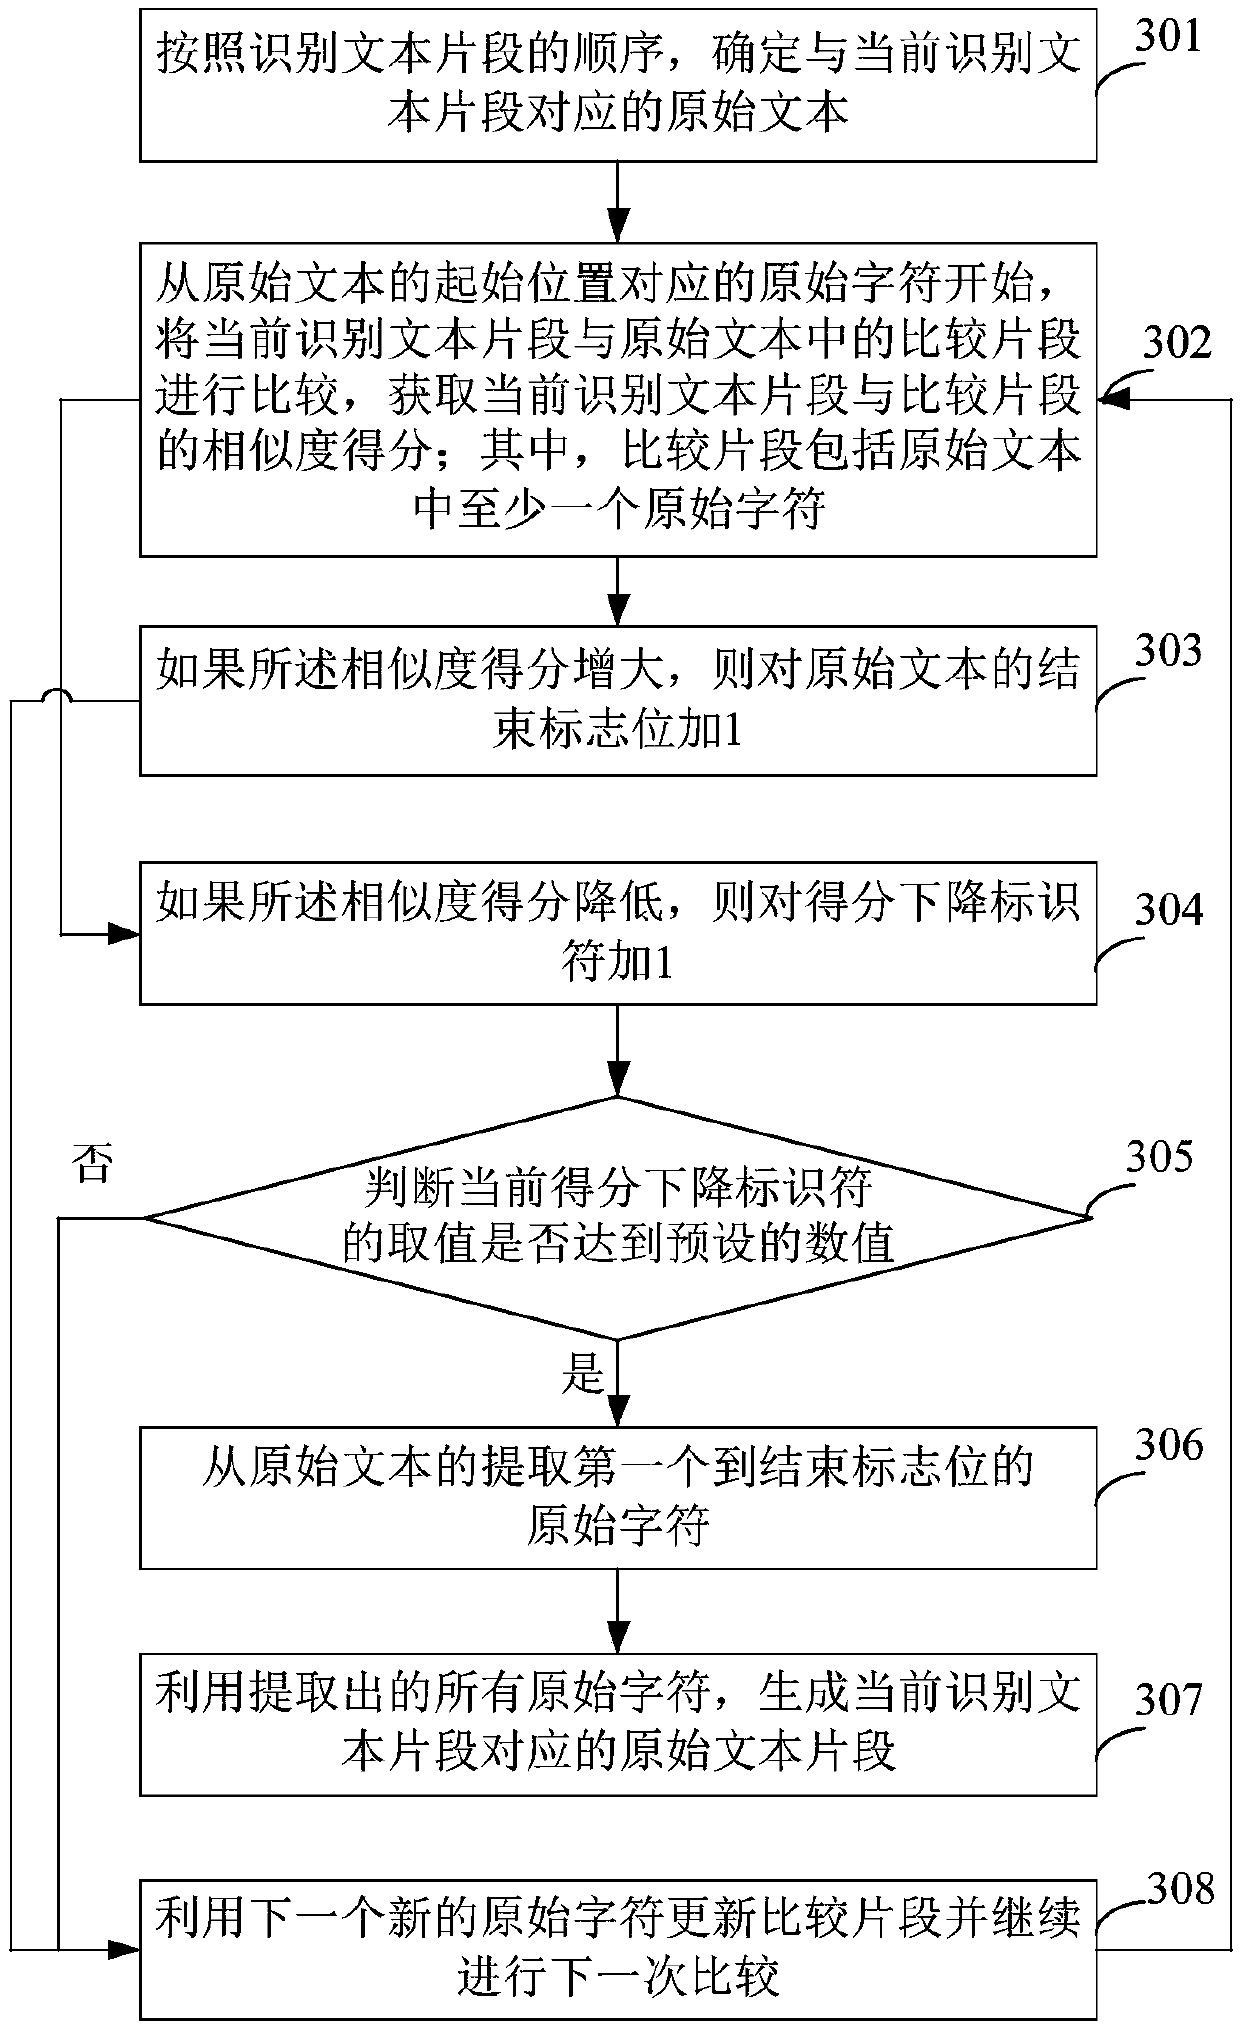 Voice processing method and device based on artificial intelligence